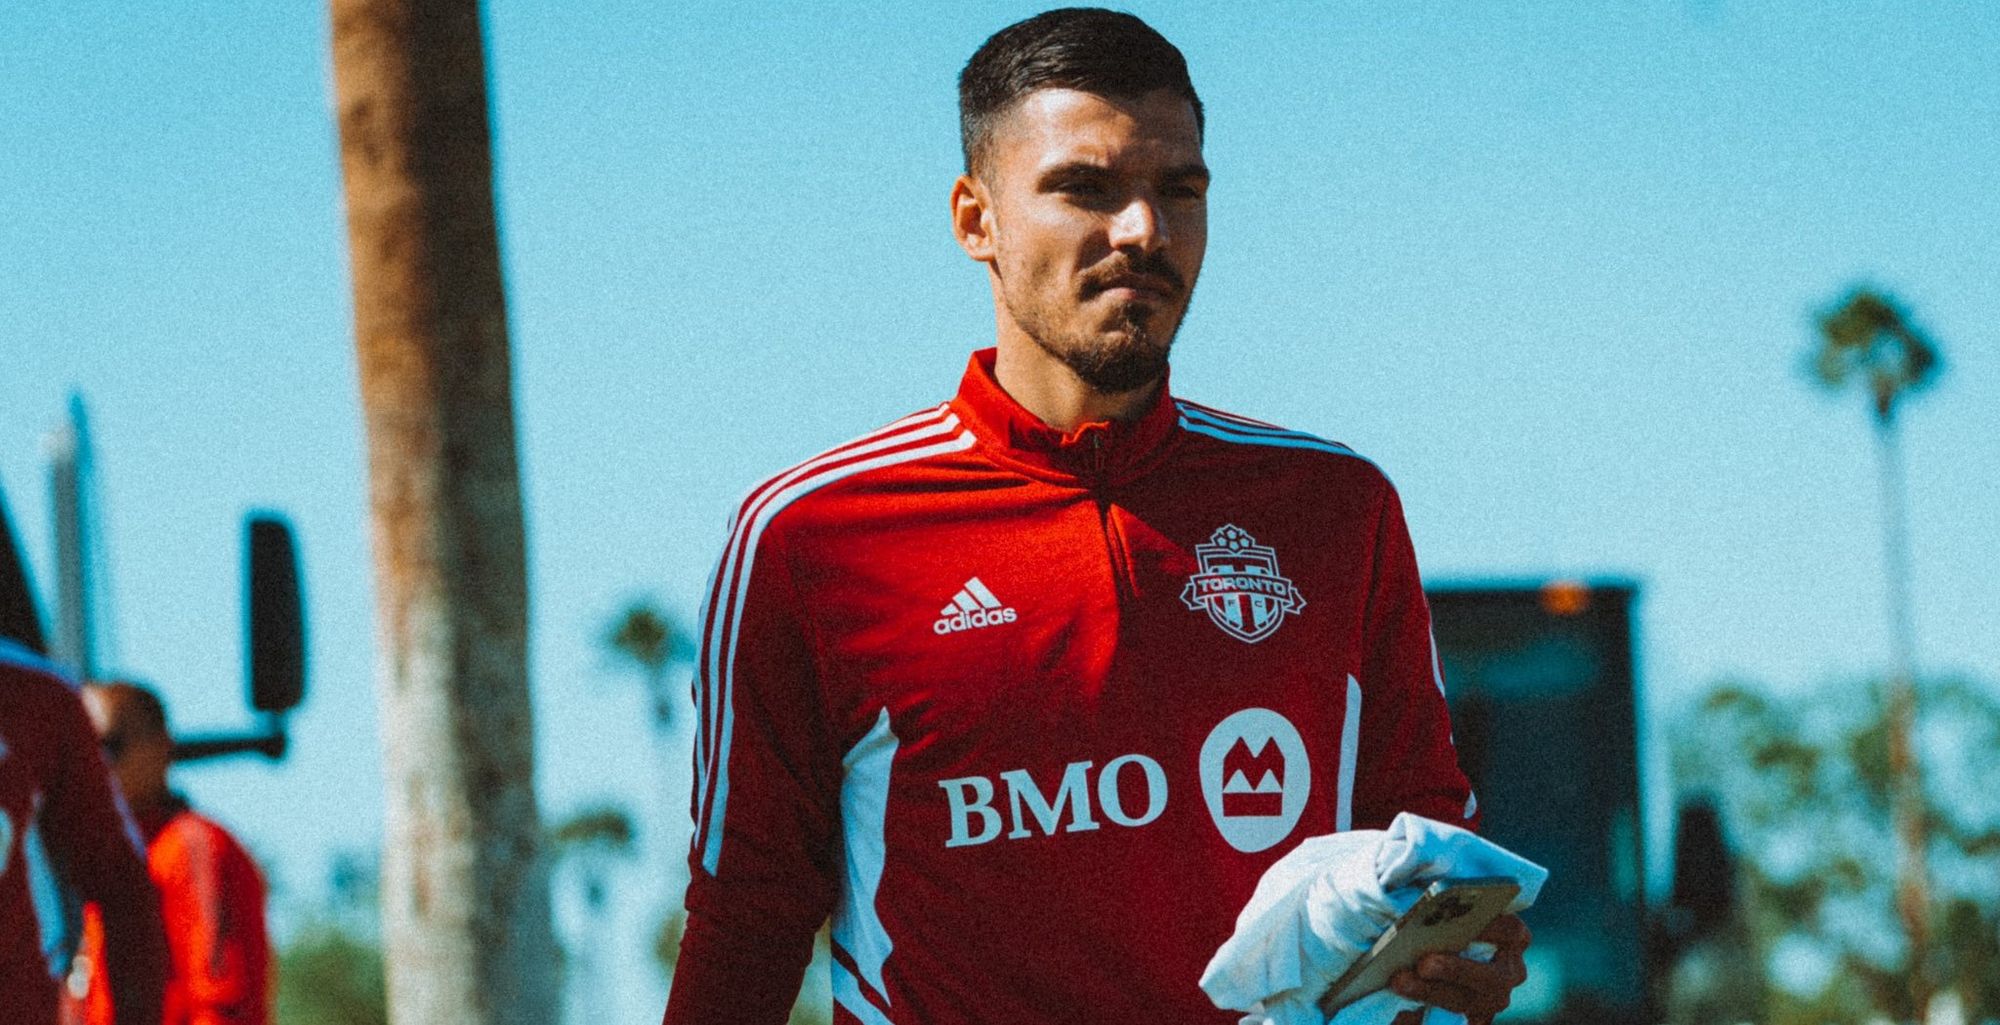 Toronto FC transfer confirmed by Brondby IF